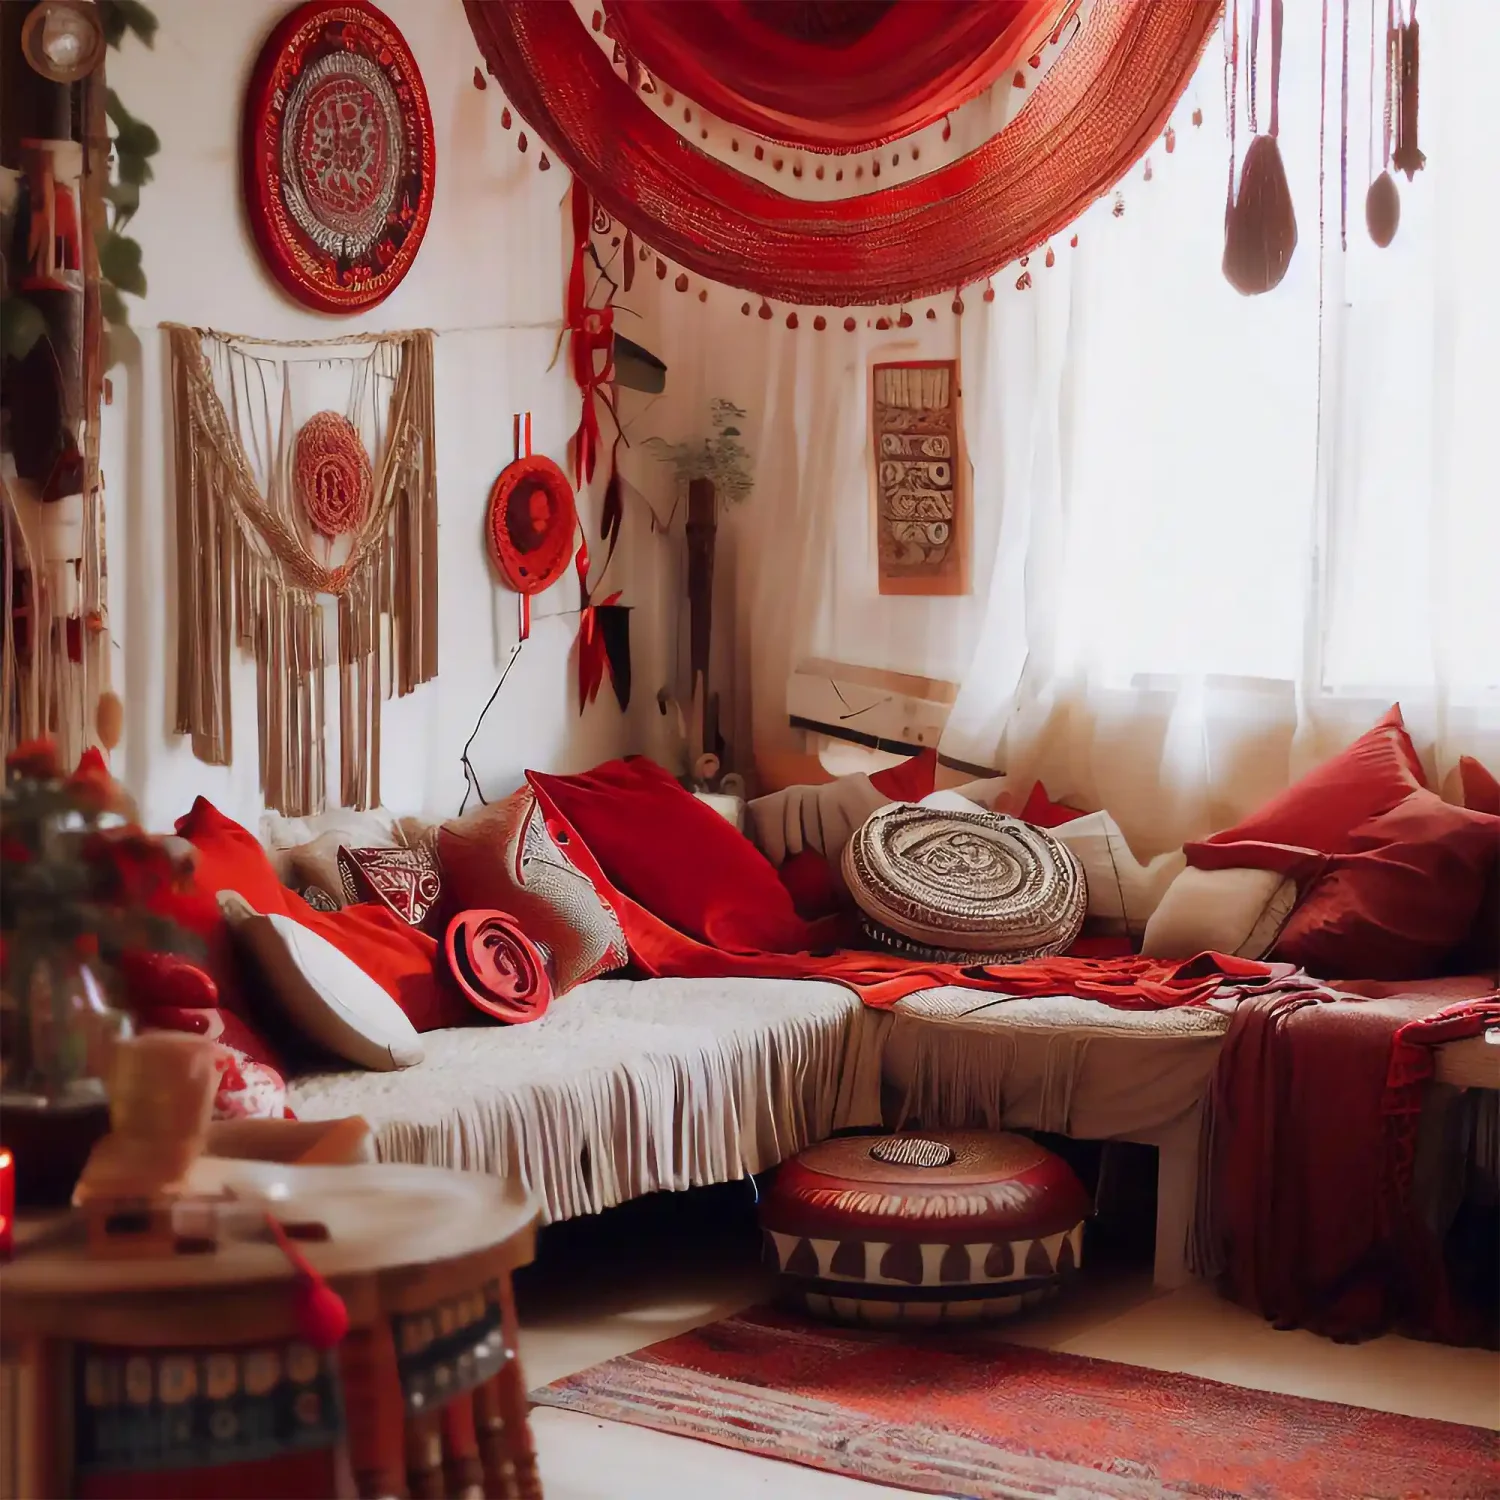 20230930164146_[fpdl.in]_photography-boho-interior-red-design_940124-36_full